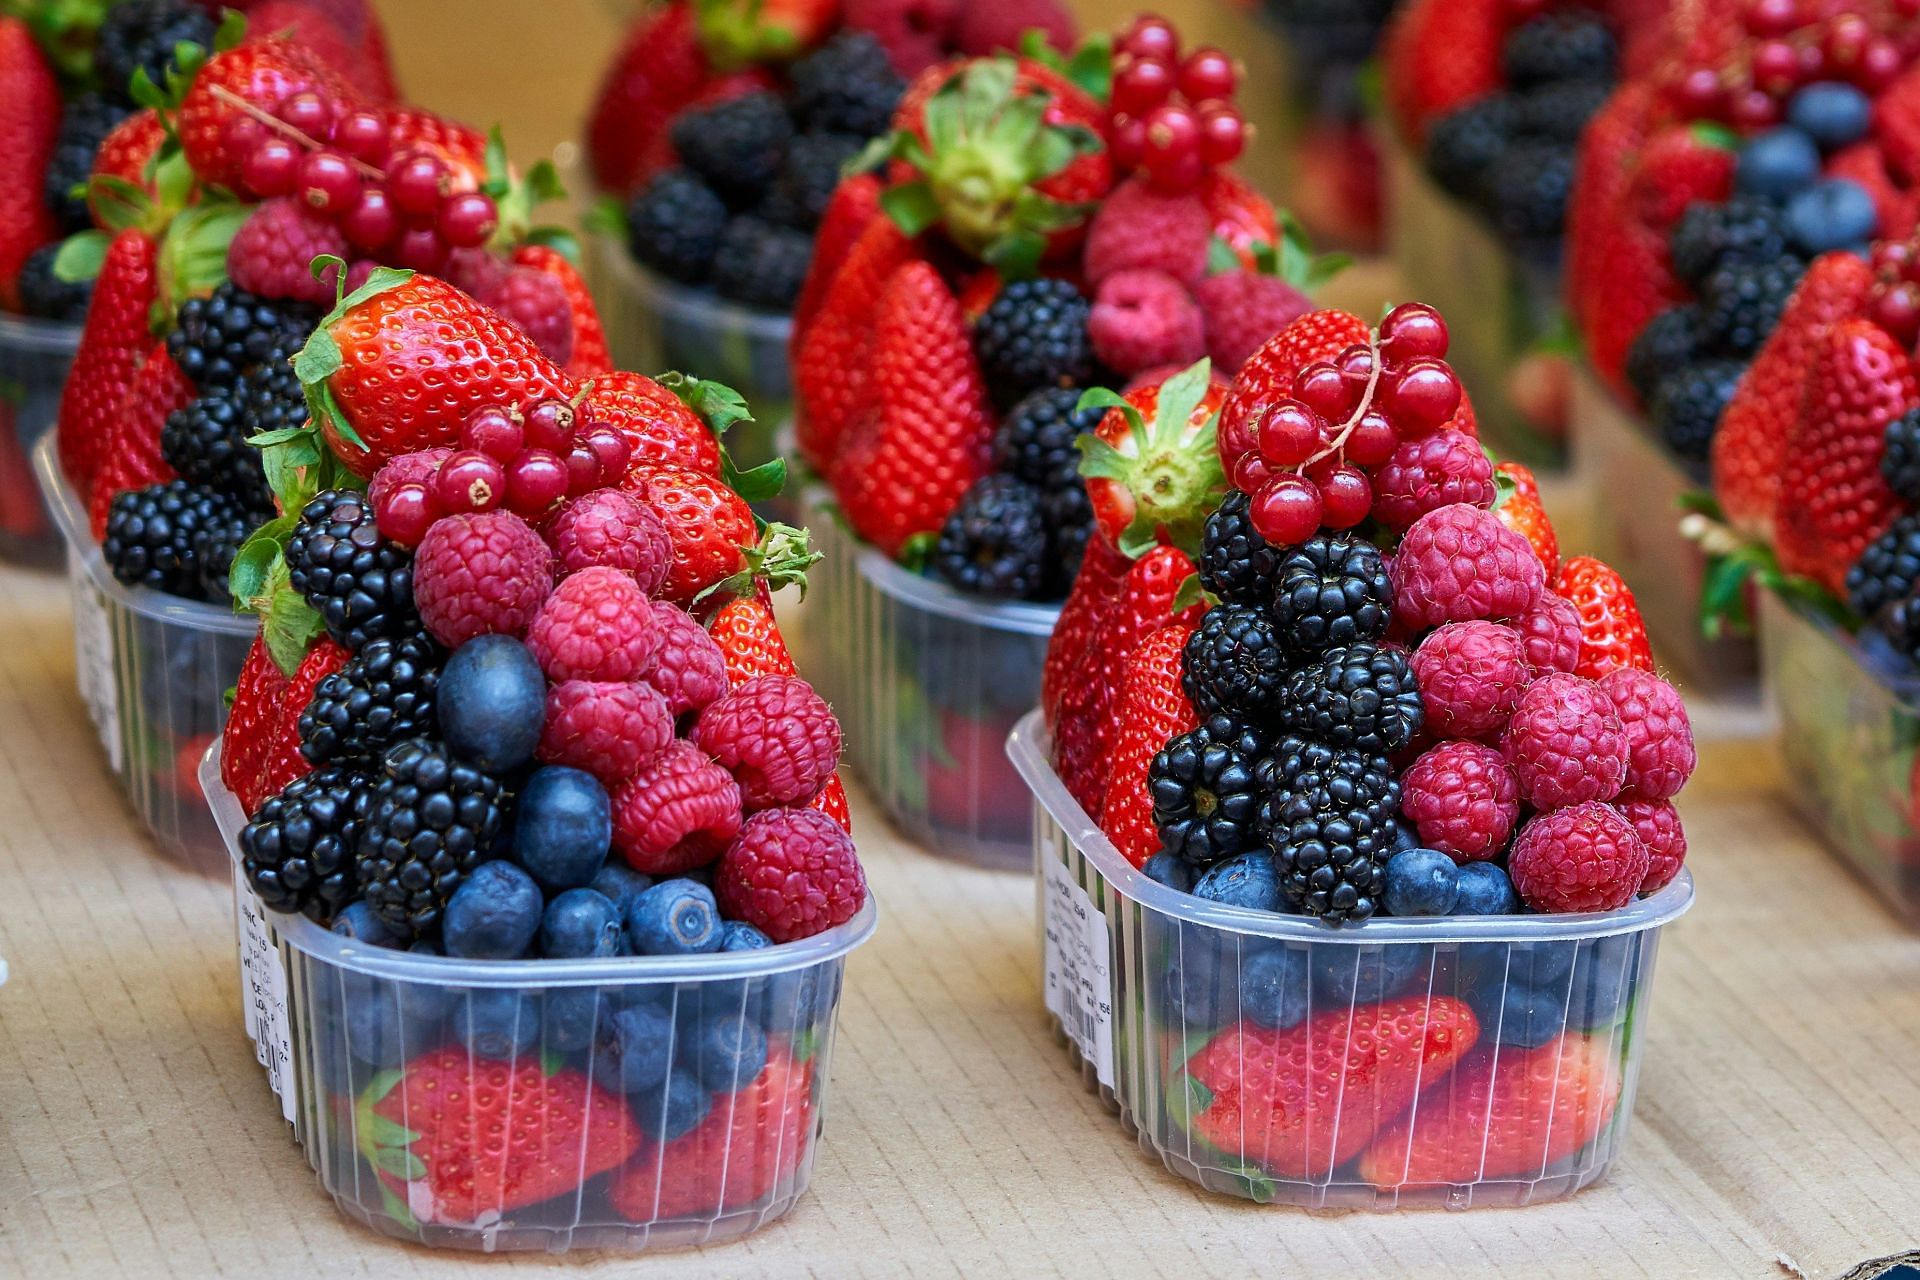 Avoid berries (Image by Timo Volz/Unsplash)